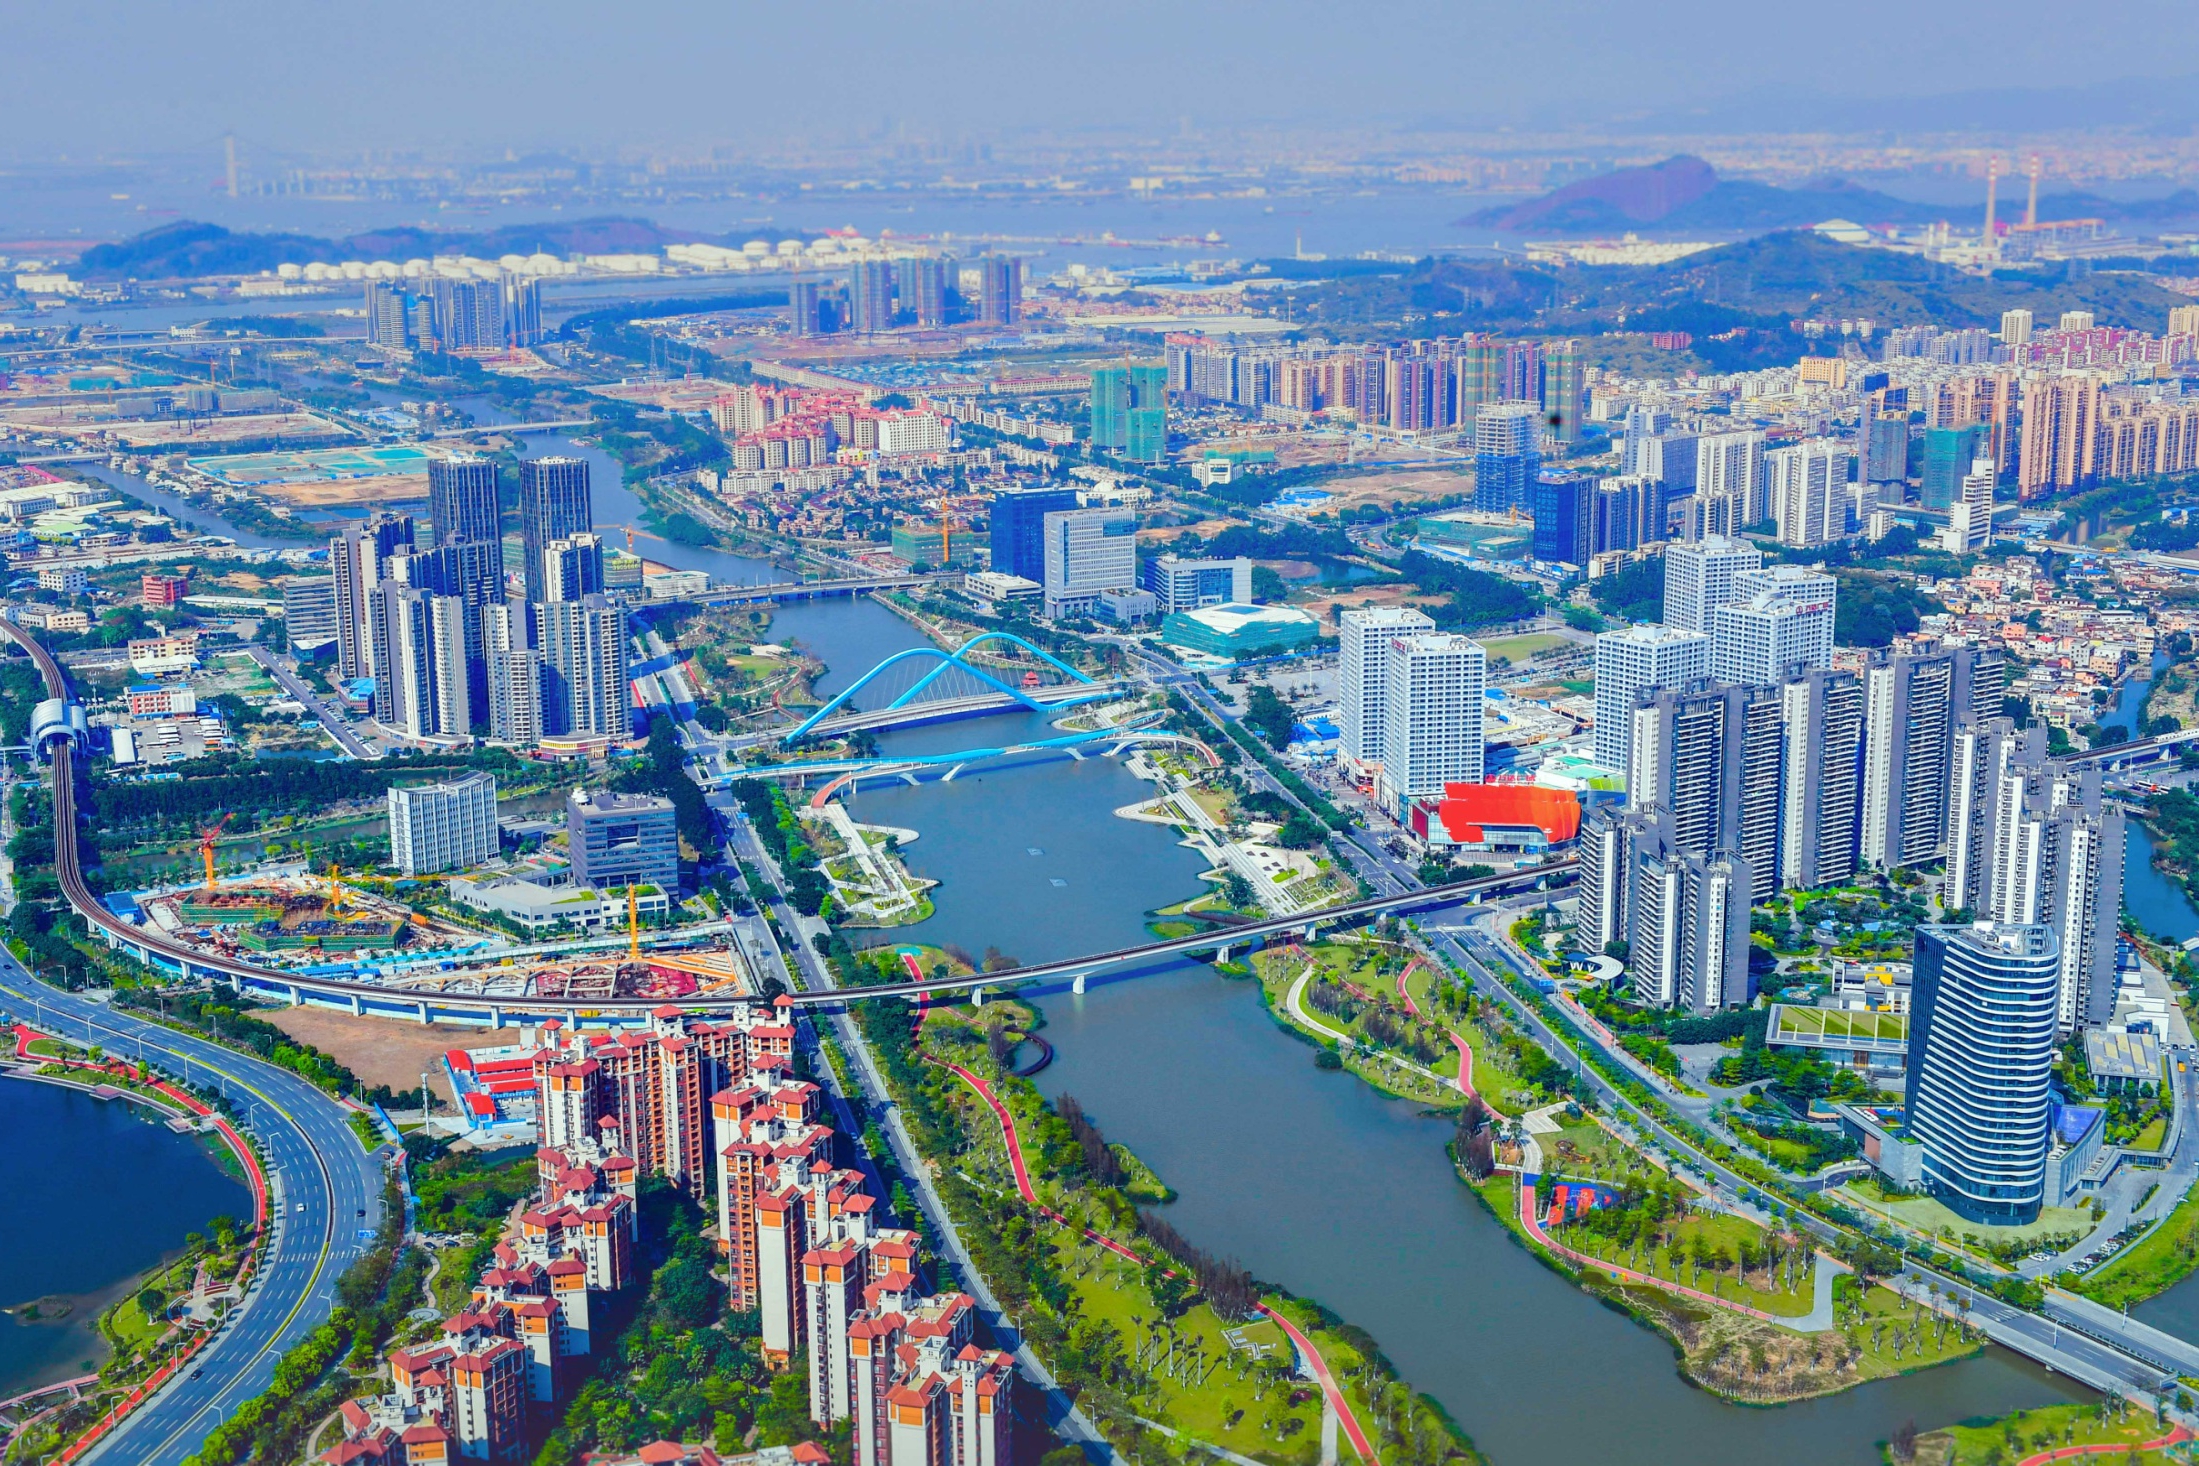 In March this year, the Guangzhou-Hong-Kong-Macau Belt and Road Investment Enterprises Cooperation Forum will debut in Nansha. The forum will be a key platform in the GBA to link enterprises in both China and the countries along the Belt and Road for further collaboration and support from the international community.